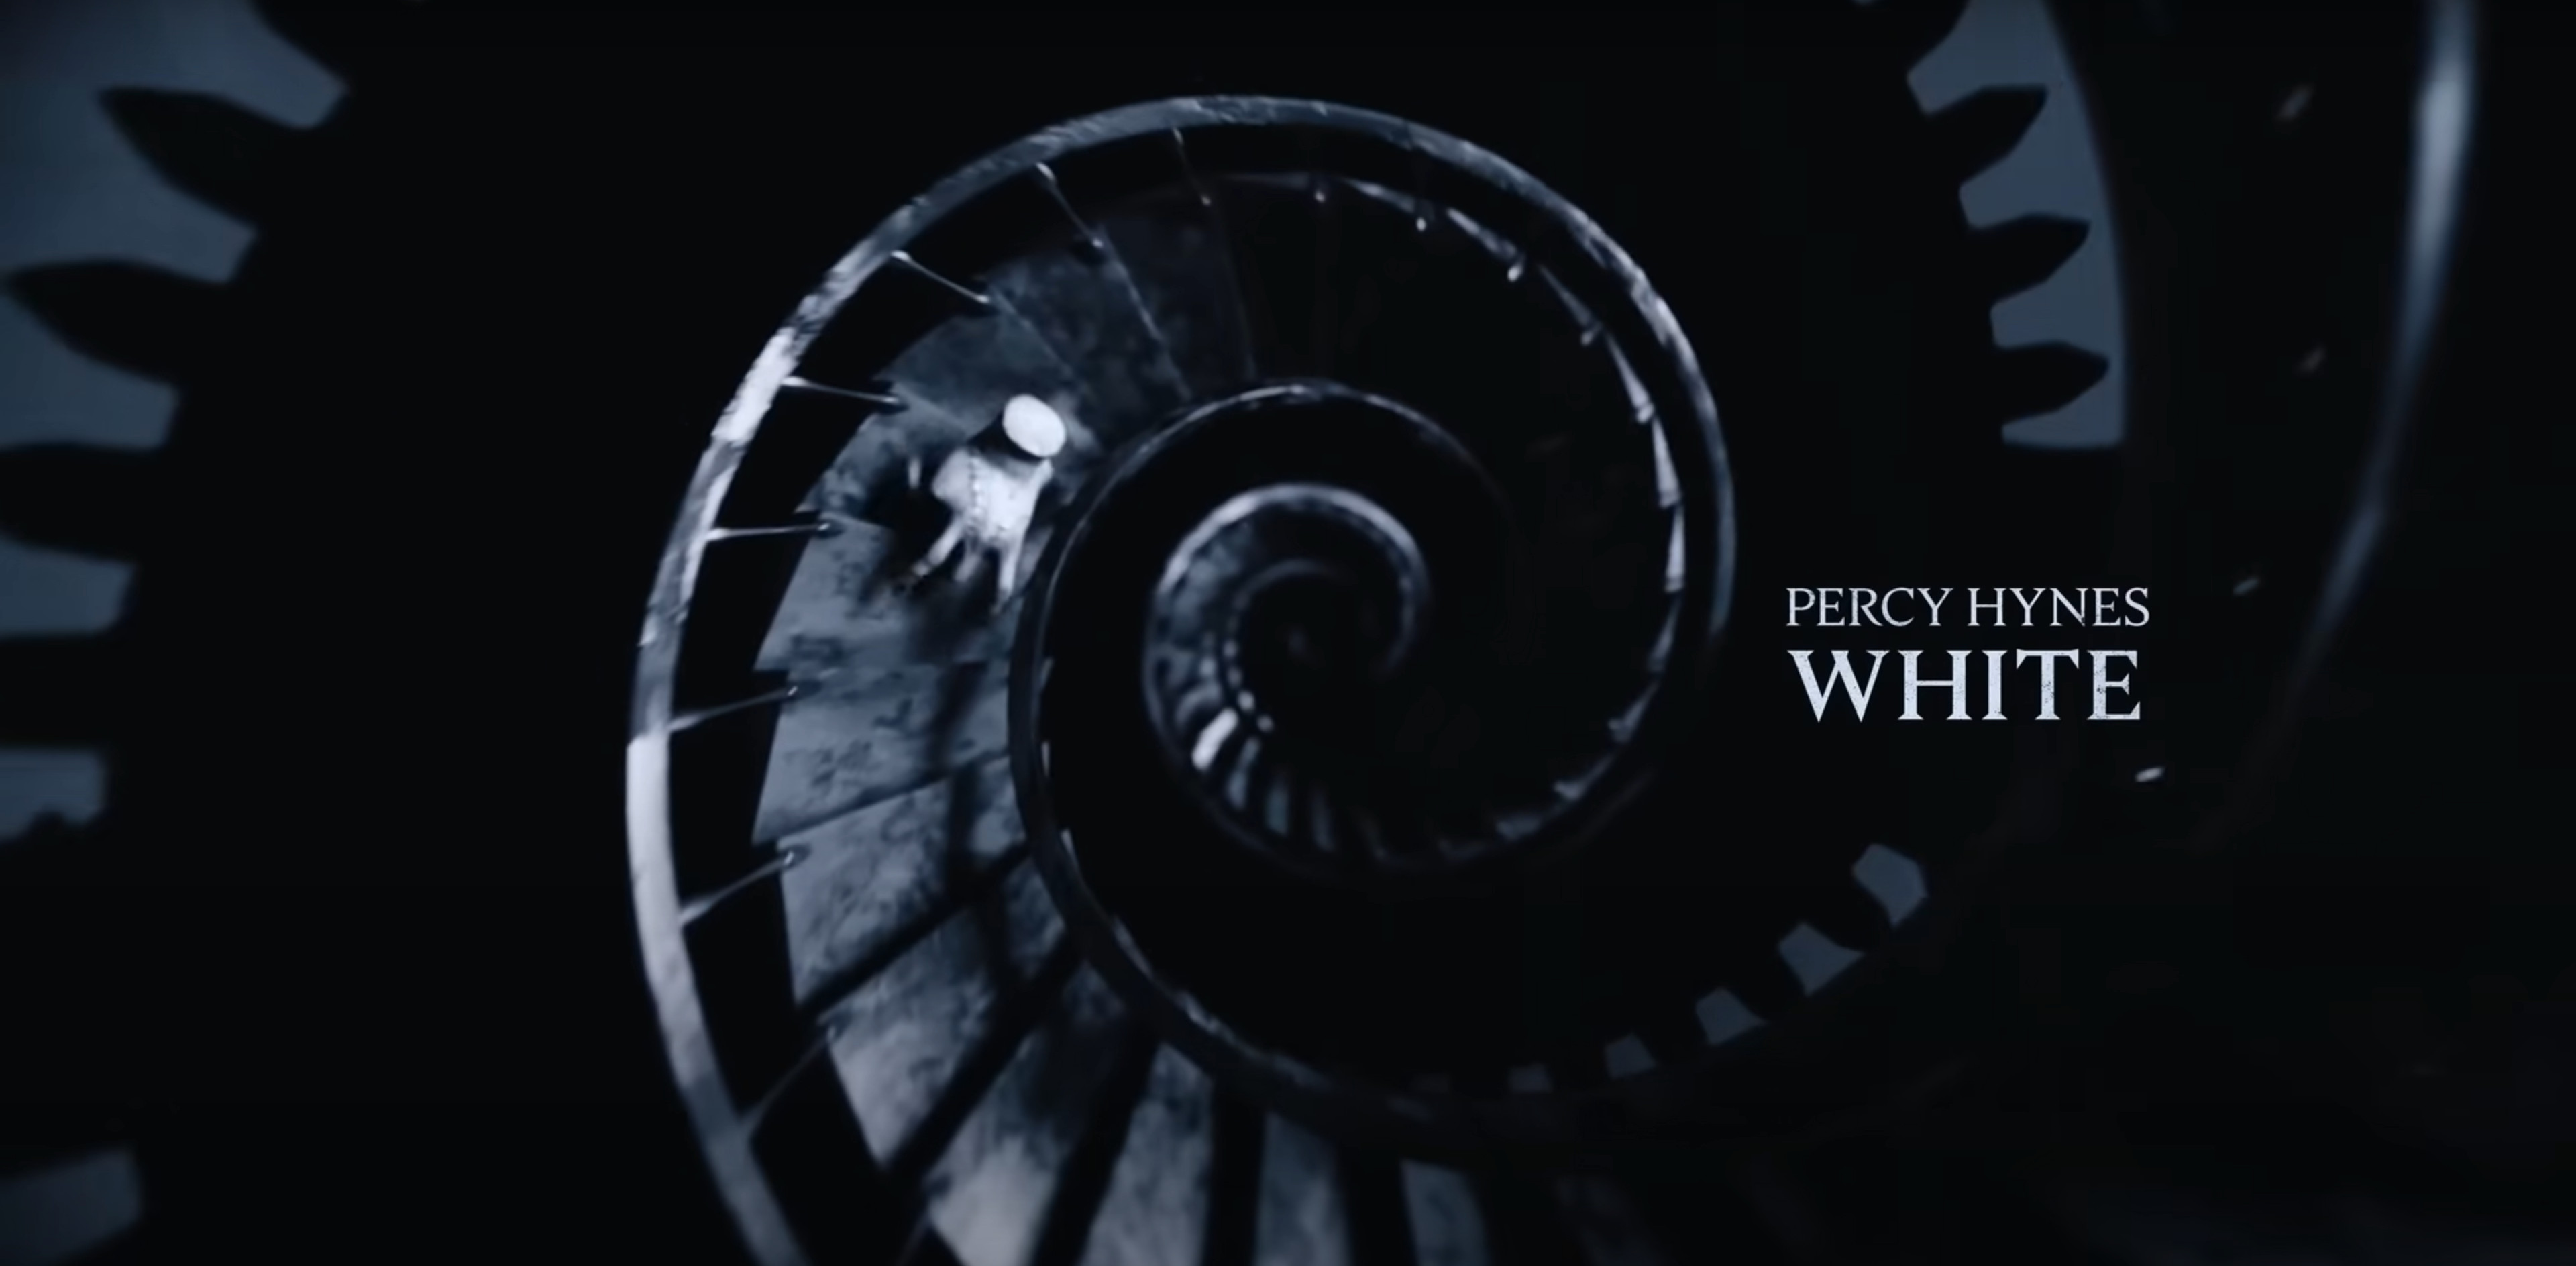 Thing crawling up the stairs in the "Wednesday" opening title sequence